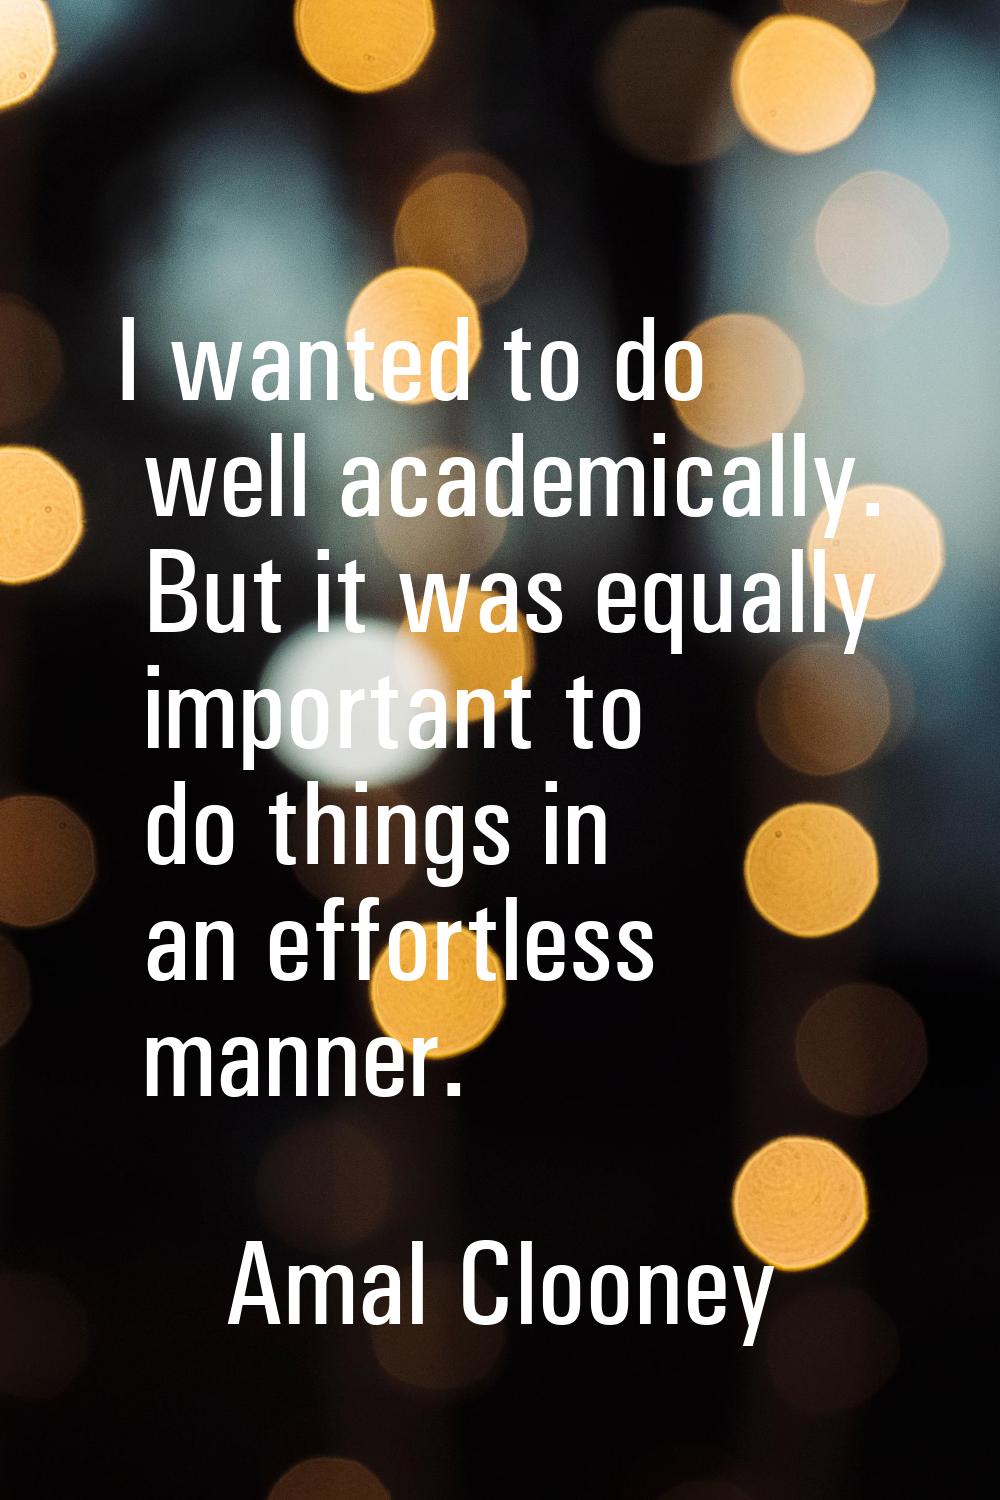 I wanted to do well academically. But it was equally important to do things in an effortless manner